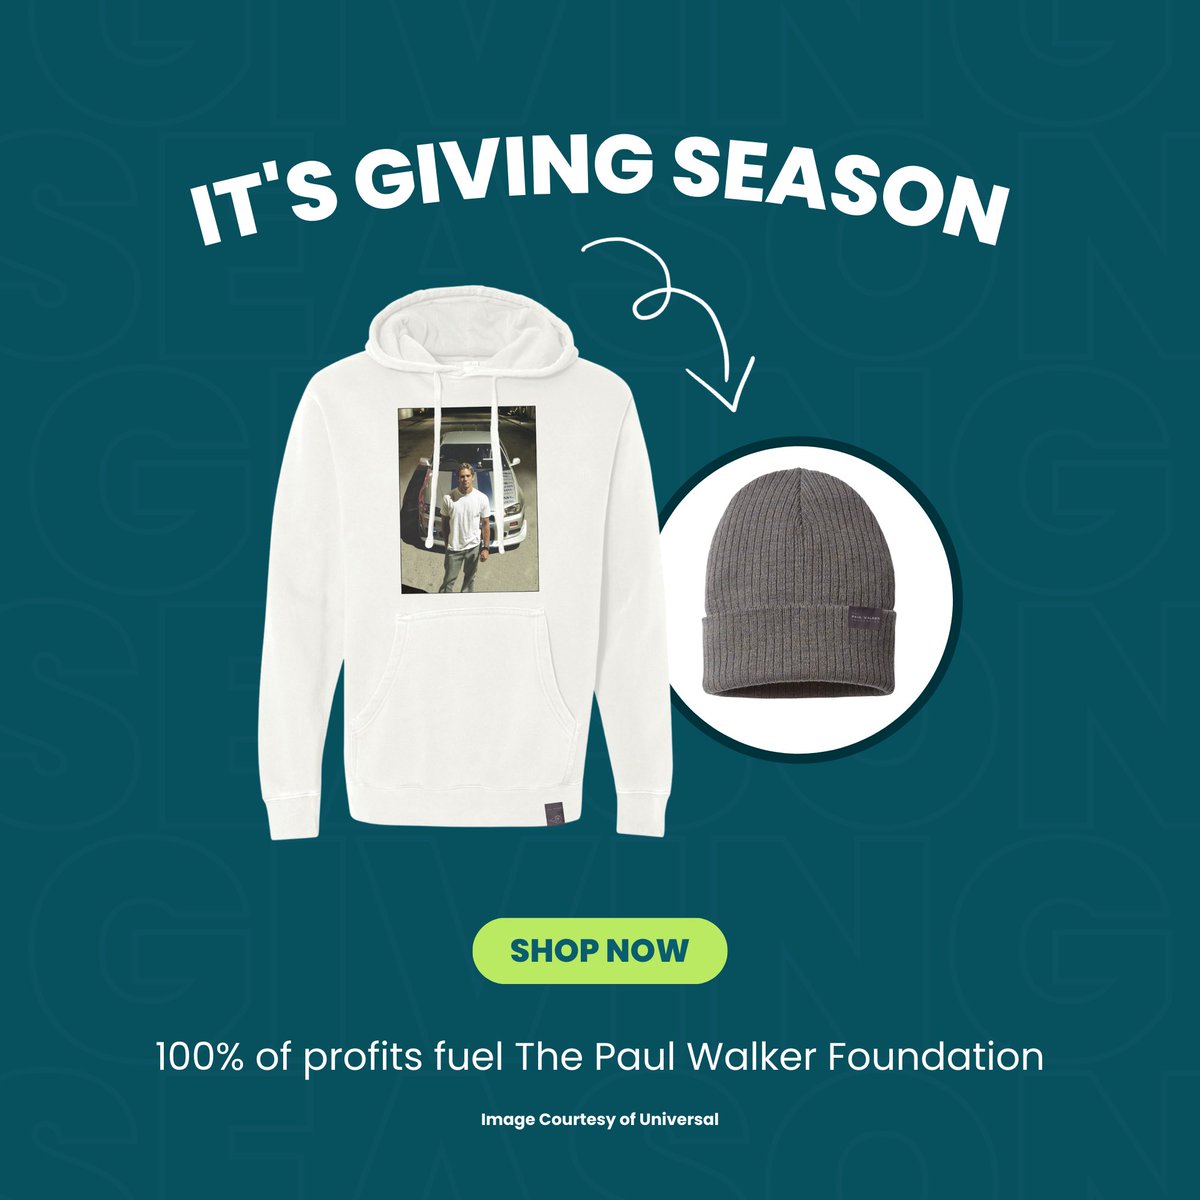 ✨ Happy #GivingSeason! ✨

Help the @PaulWalkerFdn make a difference this Giving Season by pre-ordering your limited edition merch now at: paulwalkerfoundation.org/pages/shop

100% of profits fuel The Paul Walker Foundation. 💙 #DOGOOD.®

(Image courtesy of Universal.)

- Team PW